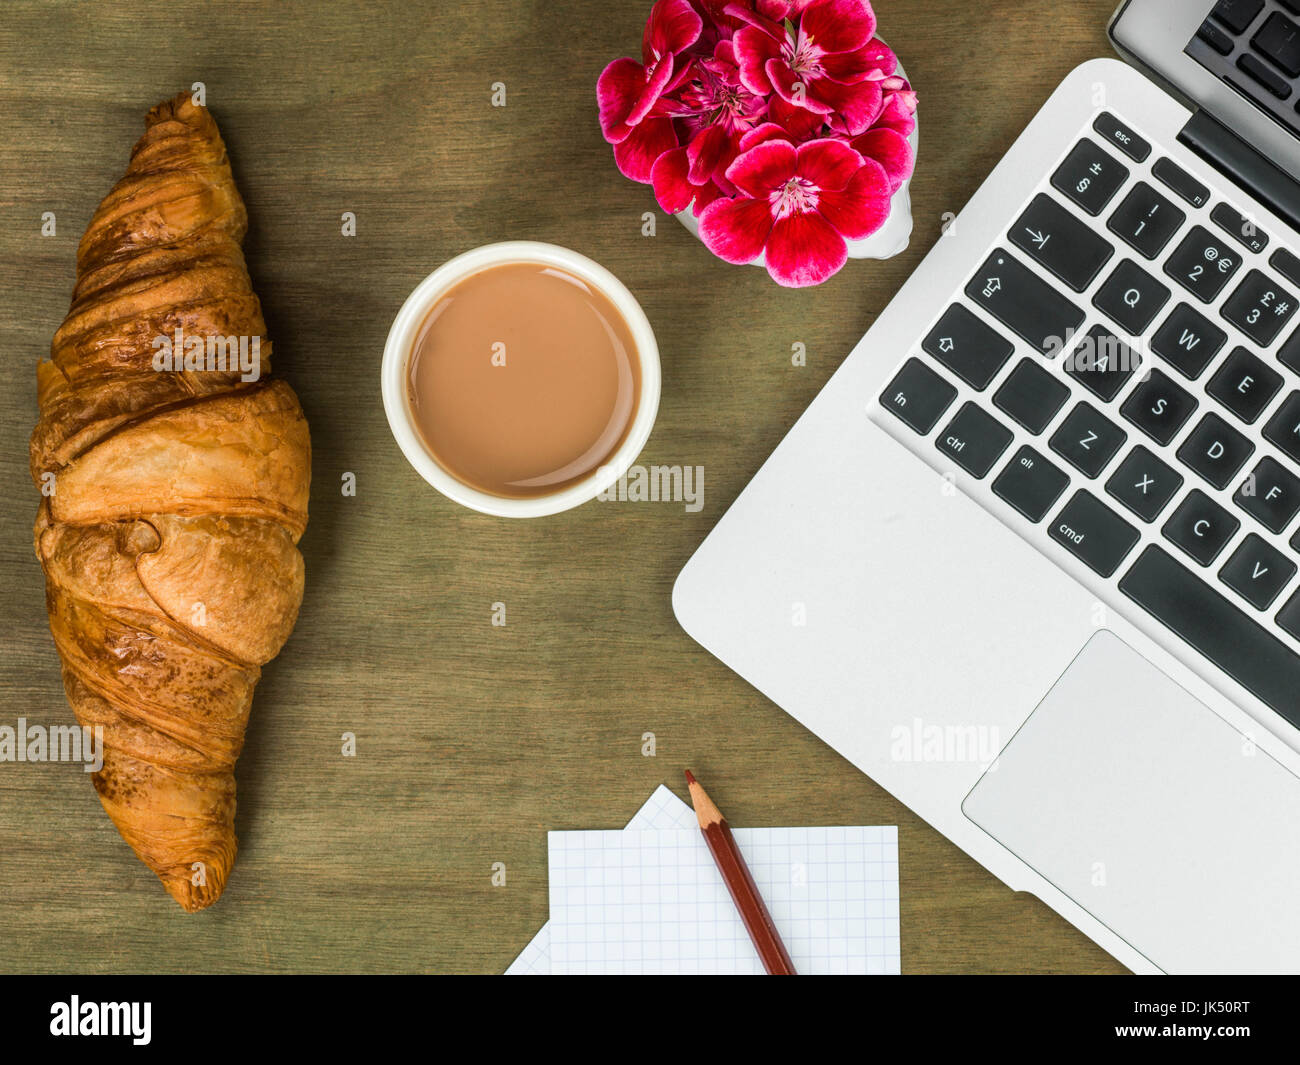 Croissant and a Cup of Tea Working Breakfast or Snack On A Wooden Distressed Desk Top Stock Photo